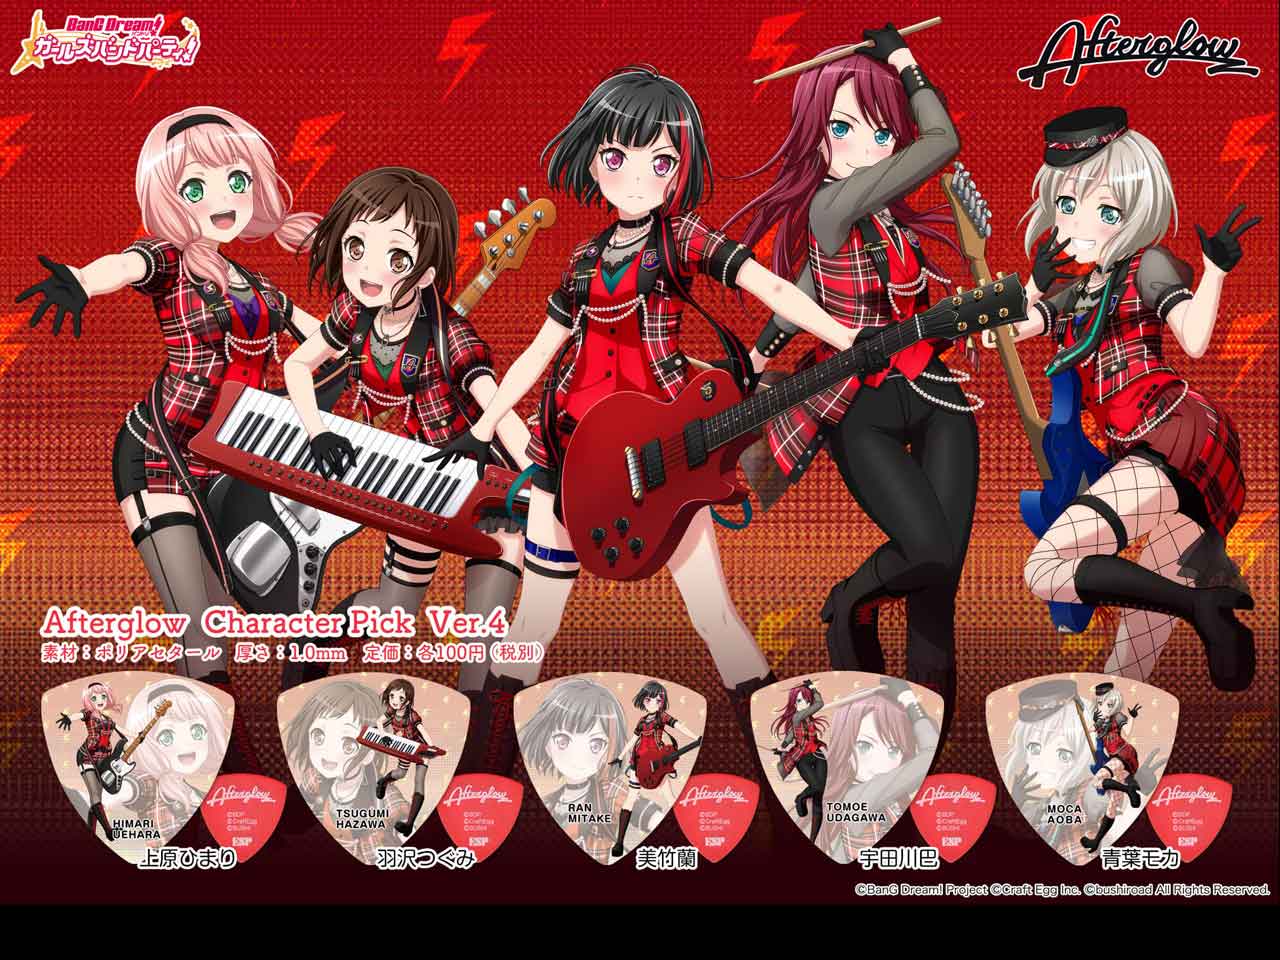 【ESP×BanG Dream!コラボピック】Afterglow Character Pick Ver.4 "羽沢つぐみ"10枚セット（GBP TSUGUMI AFTERGLOW 4）